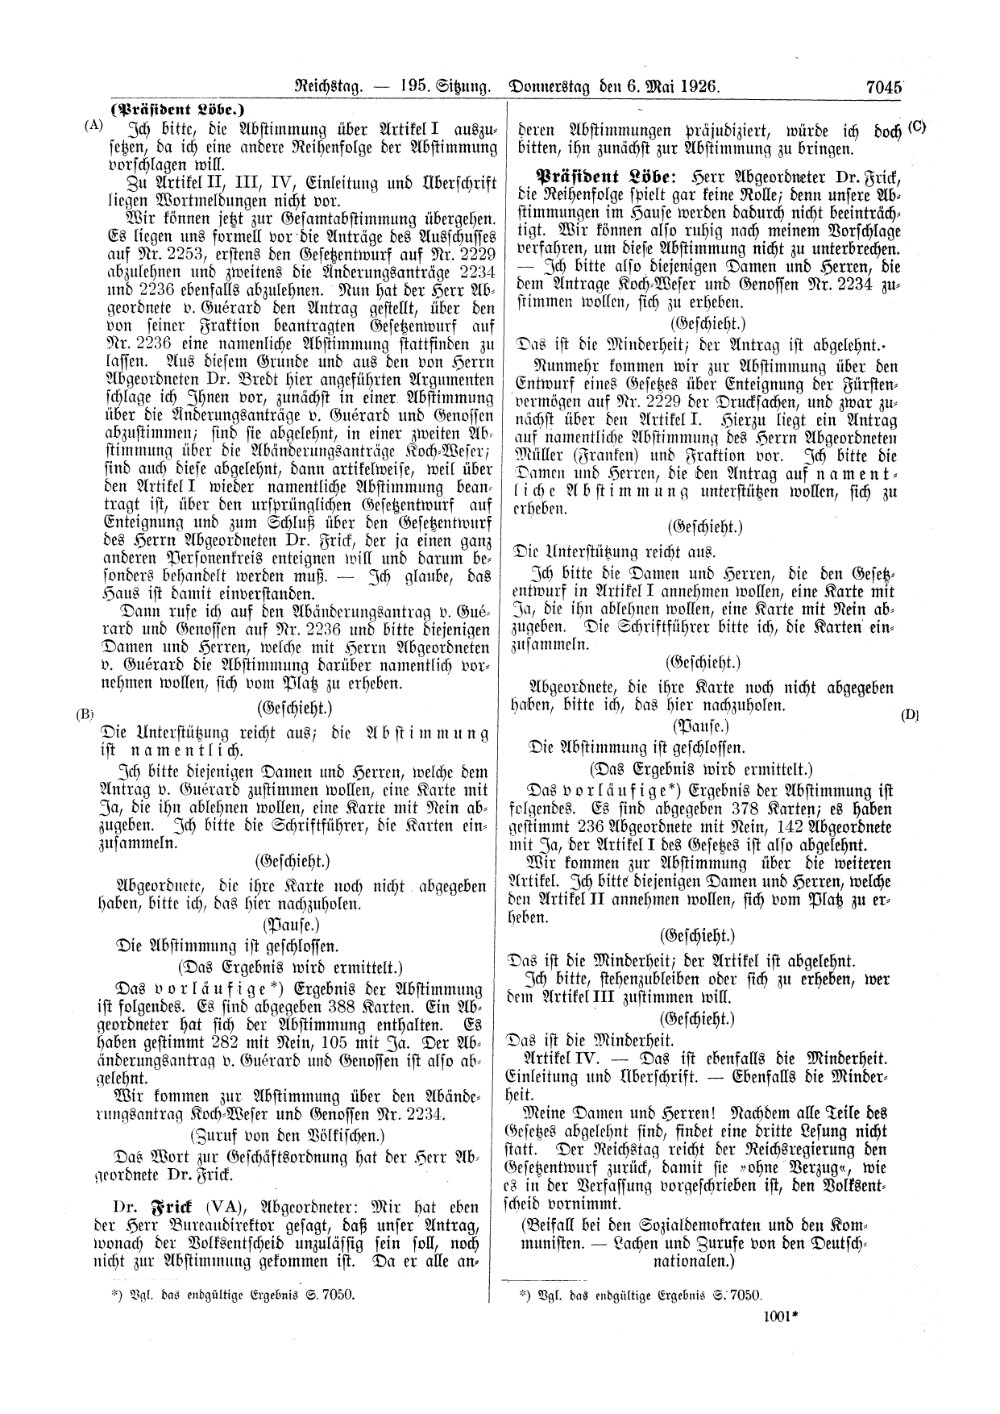 Scan of page 7045